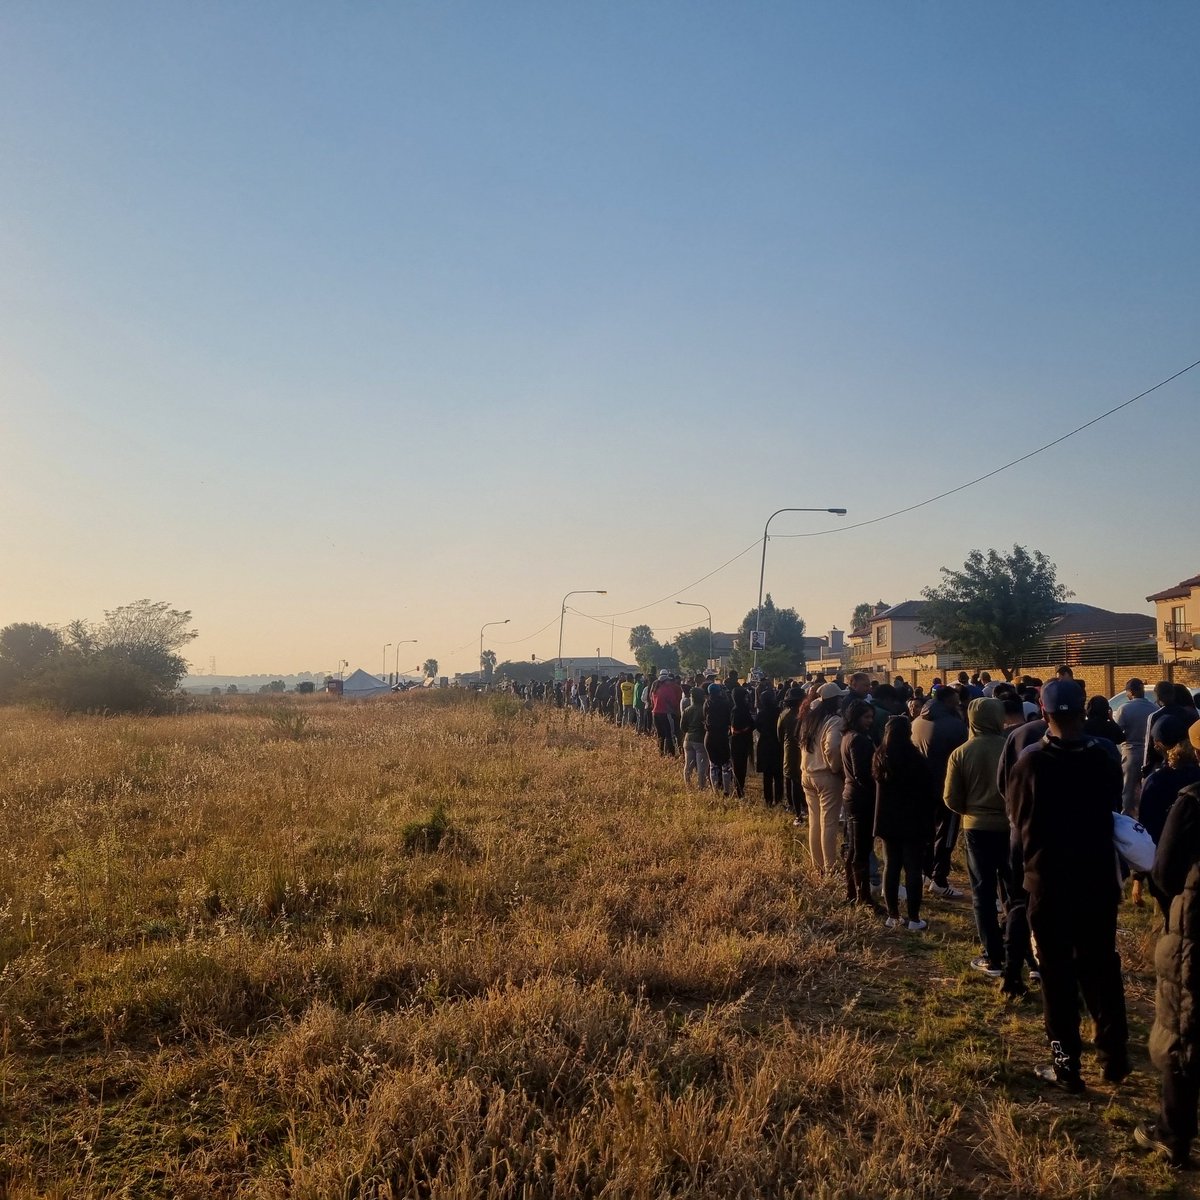 As the sun rises, queue snaking and getting longer. Voting in this Kosmosdal voting station before I head to provide political commentary, contributing to our colourful democracy. Let's not take it for granted. #saelection2024